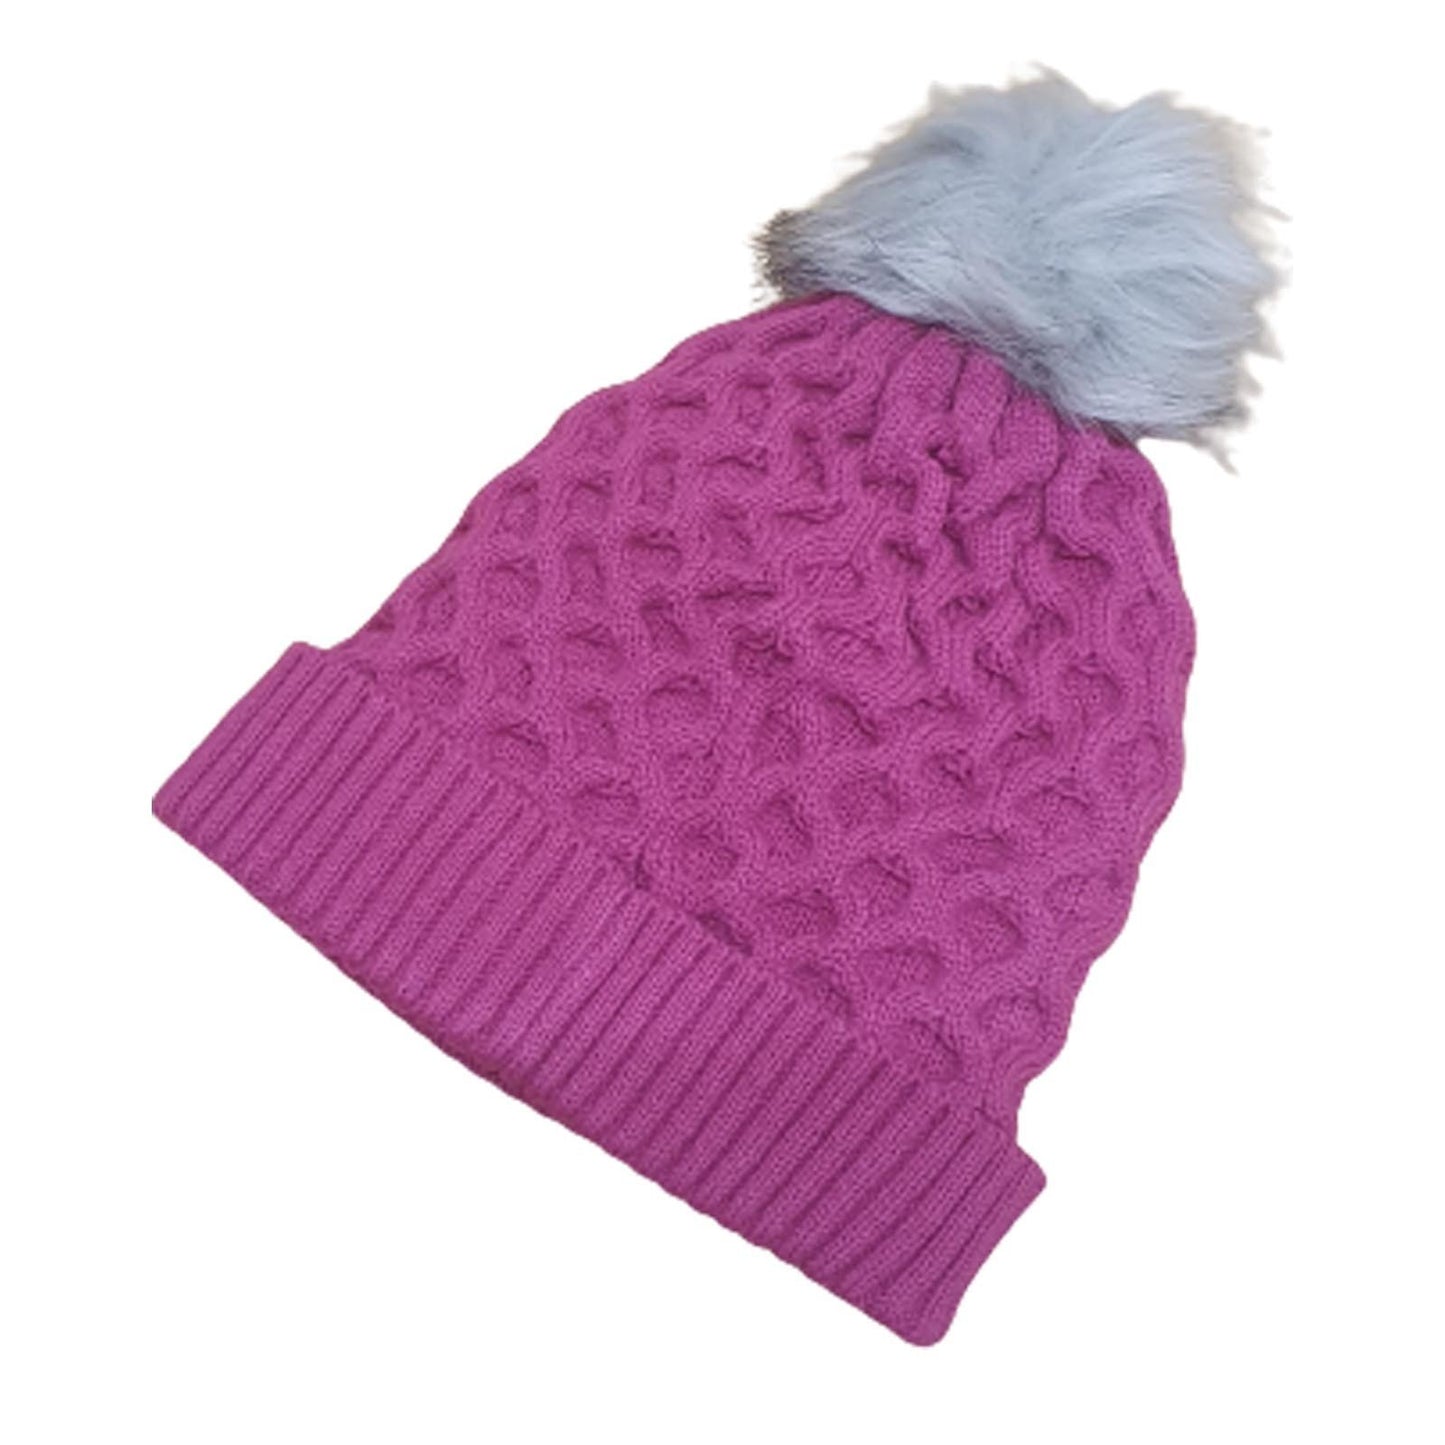 Ping Classic Knit Bobble Hat - pink